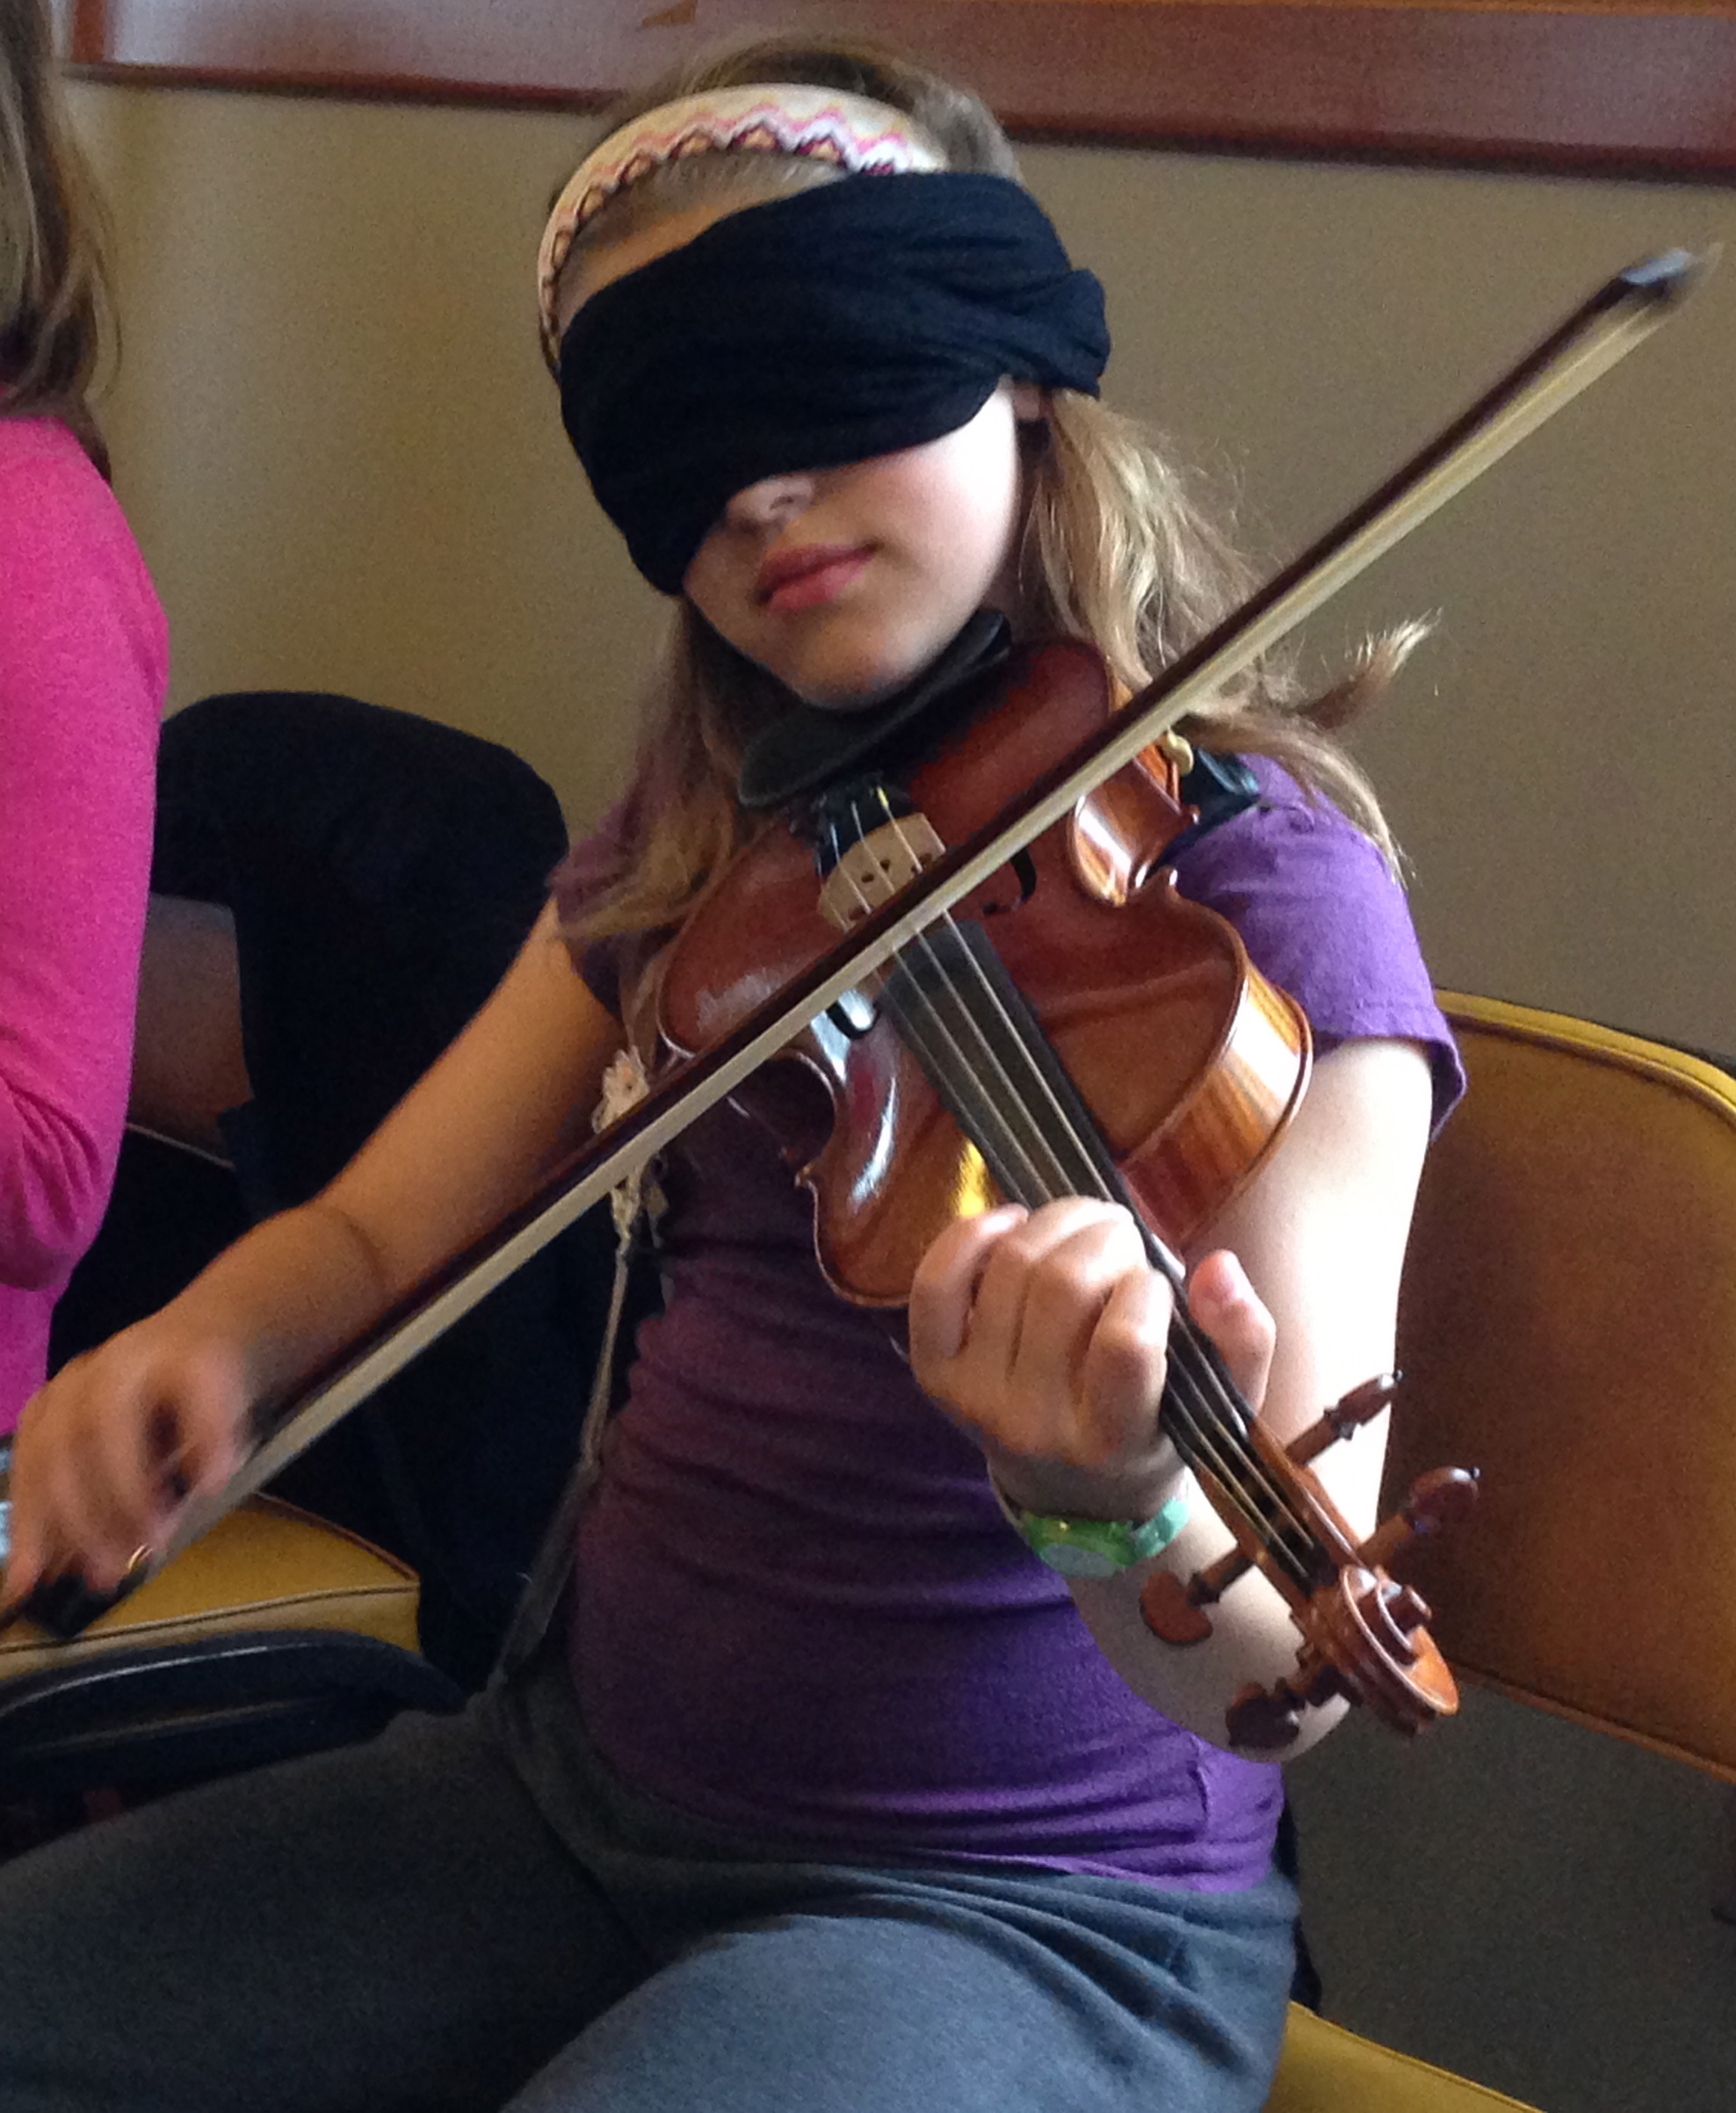 You should trying fiddling blindfolded-- you never know what great revelations may occur!